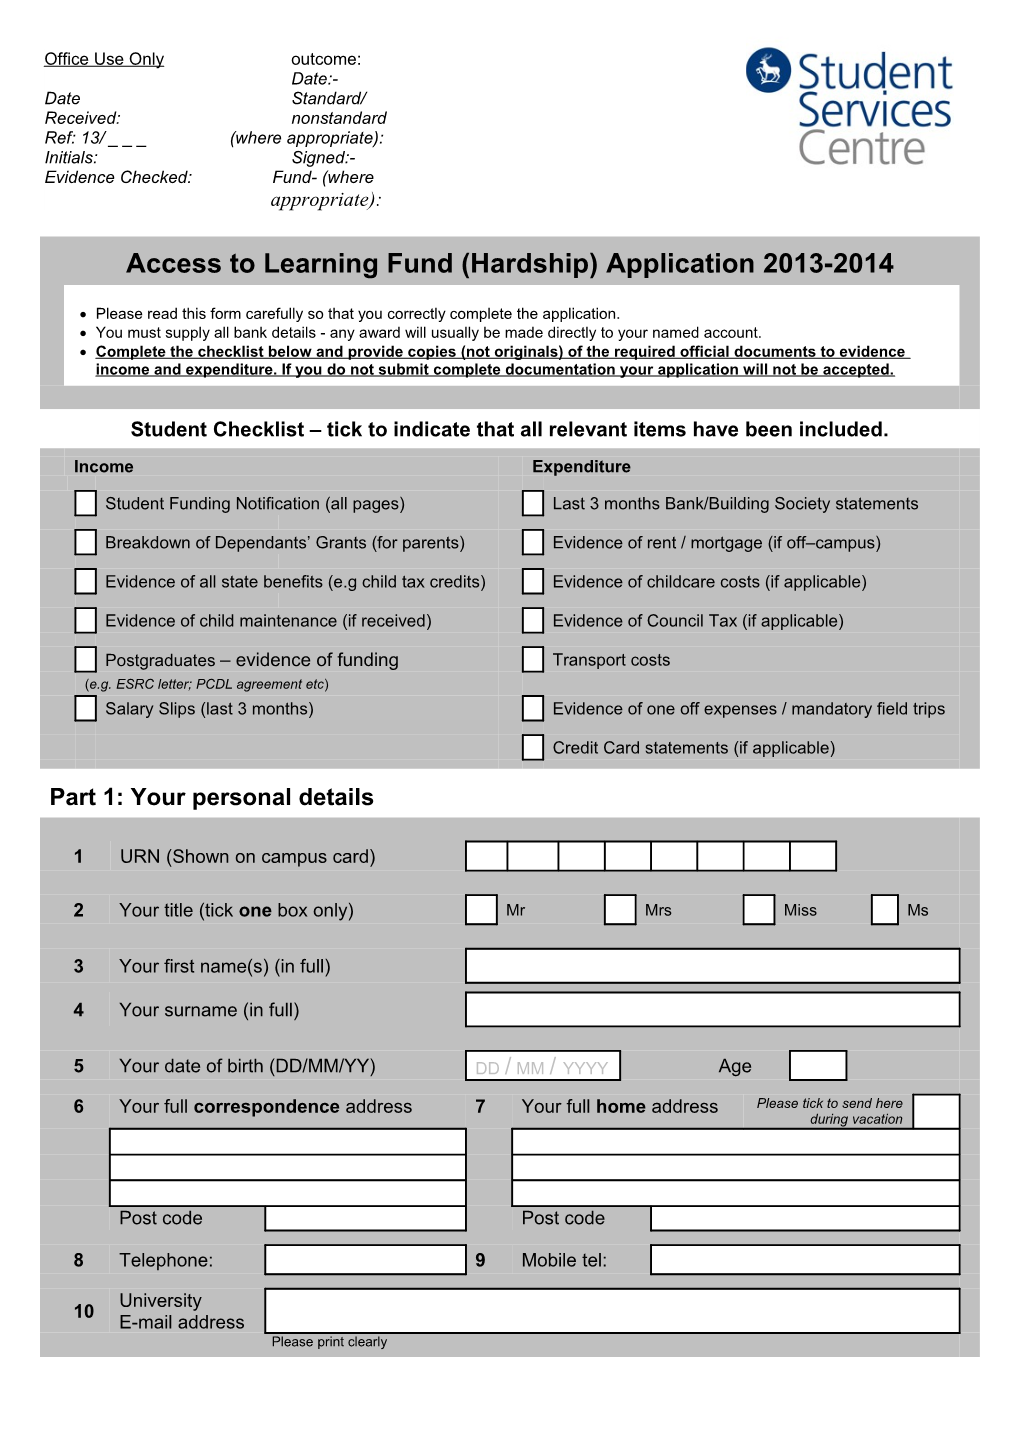 Access to Learning Fund (Hardship) Application 2013-2014